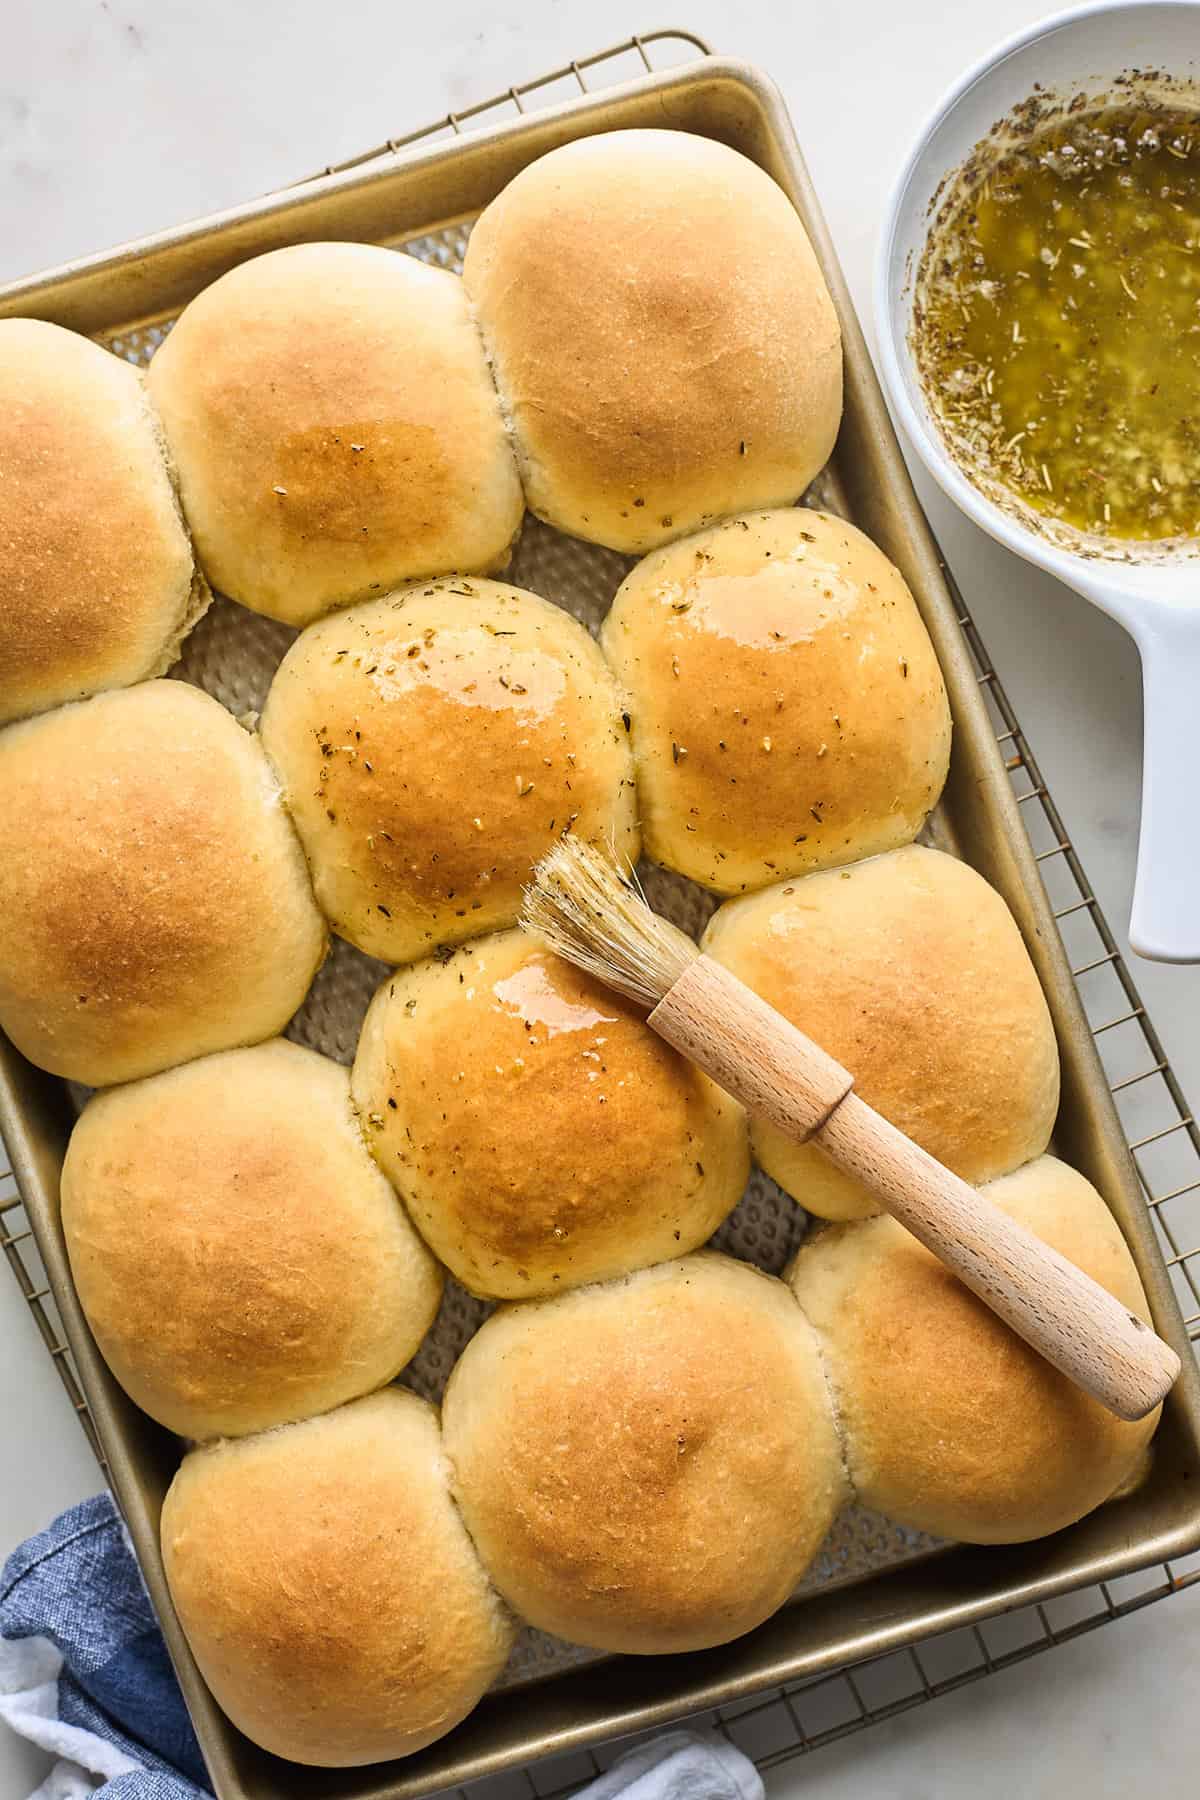 A potato dinner roll recipe out of the oven with a brush adding herby butter glaze